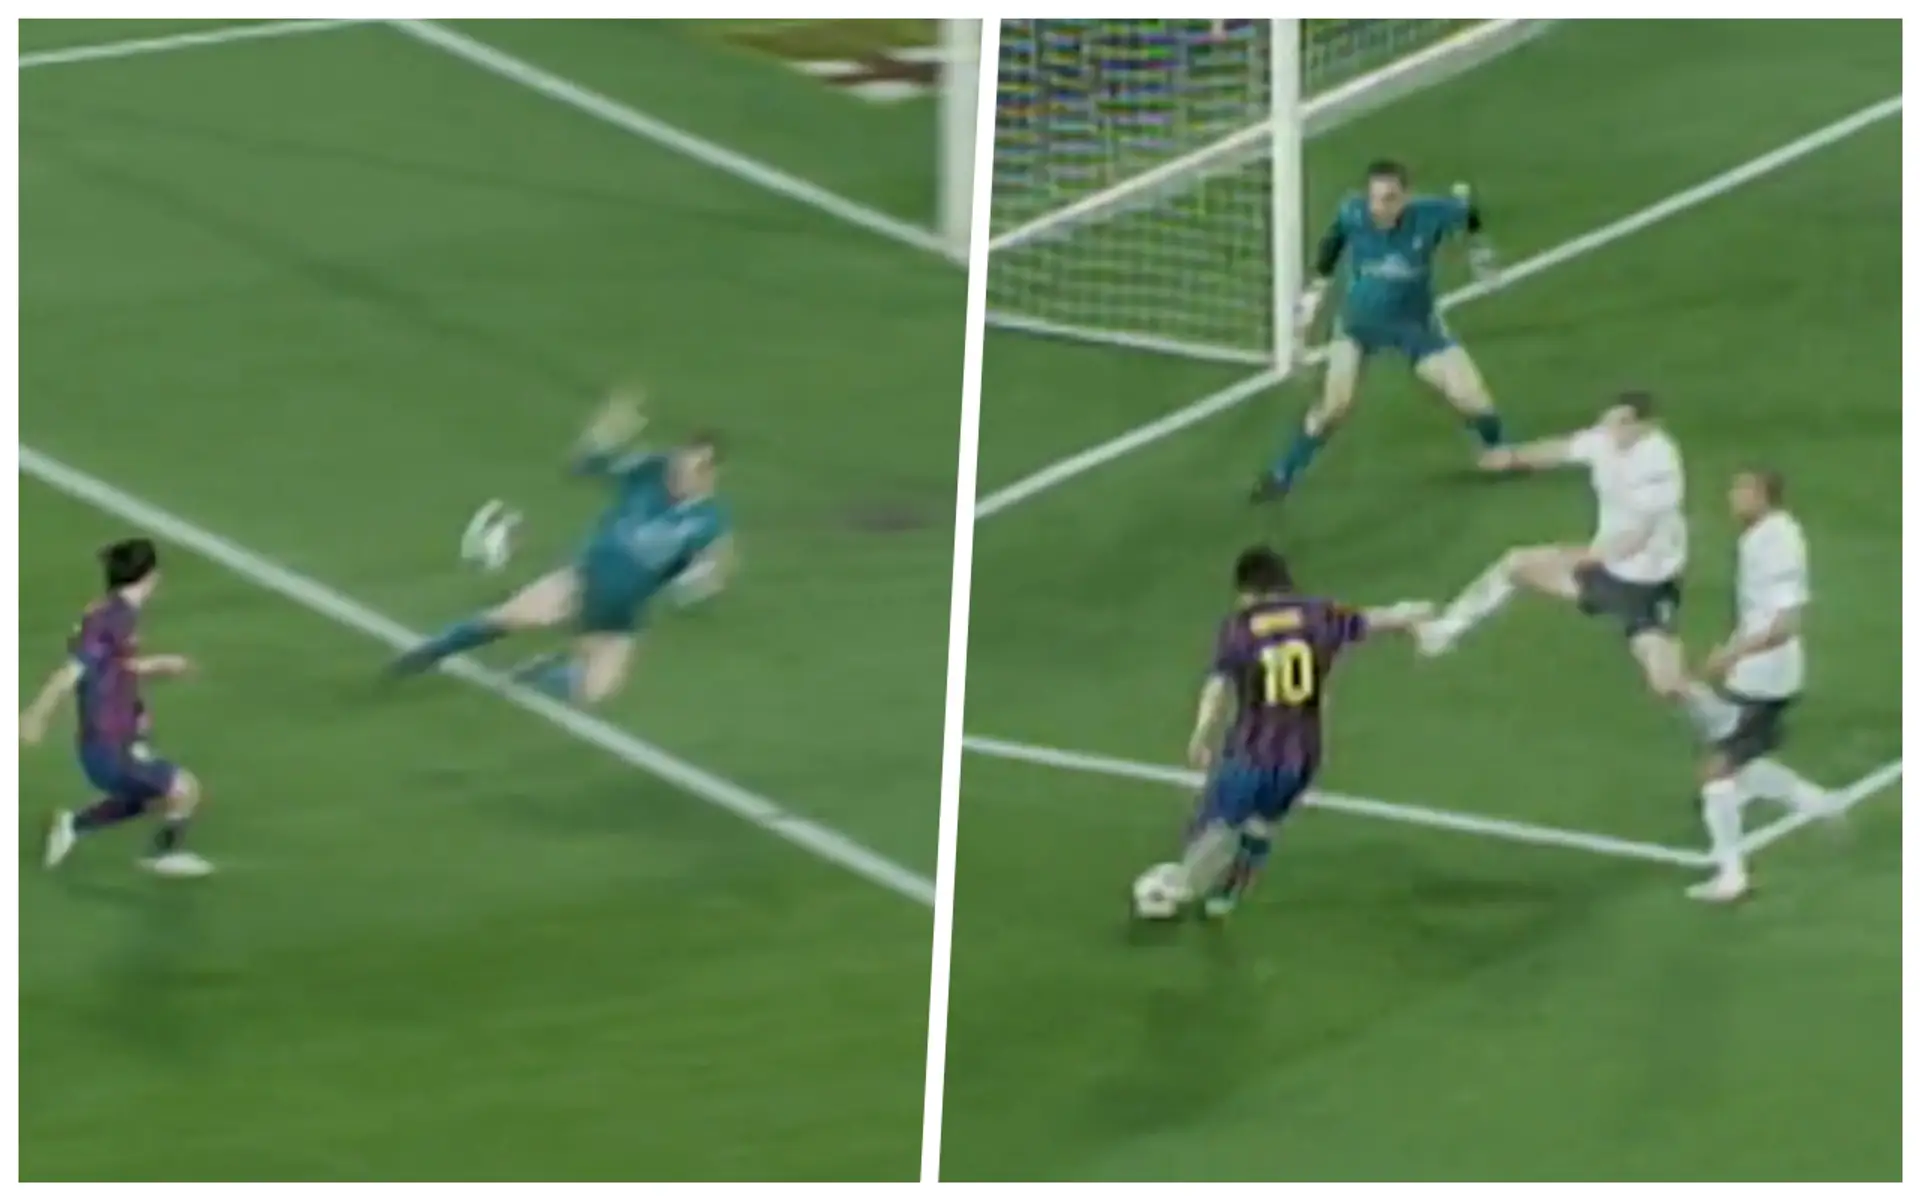 10 years ago today, Leo Messi scored 4 goals vs Arsenal in Champions League